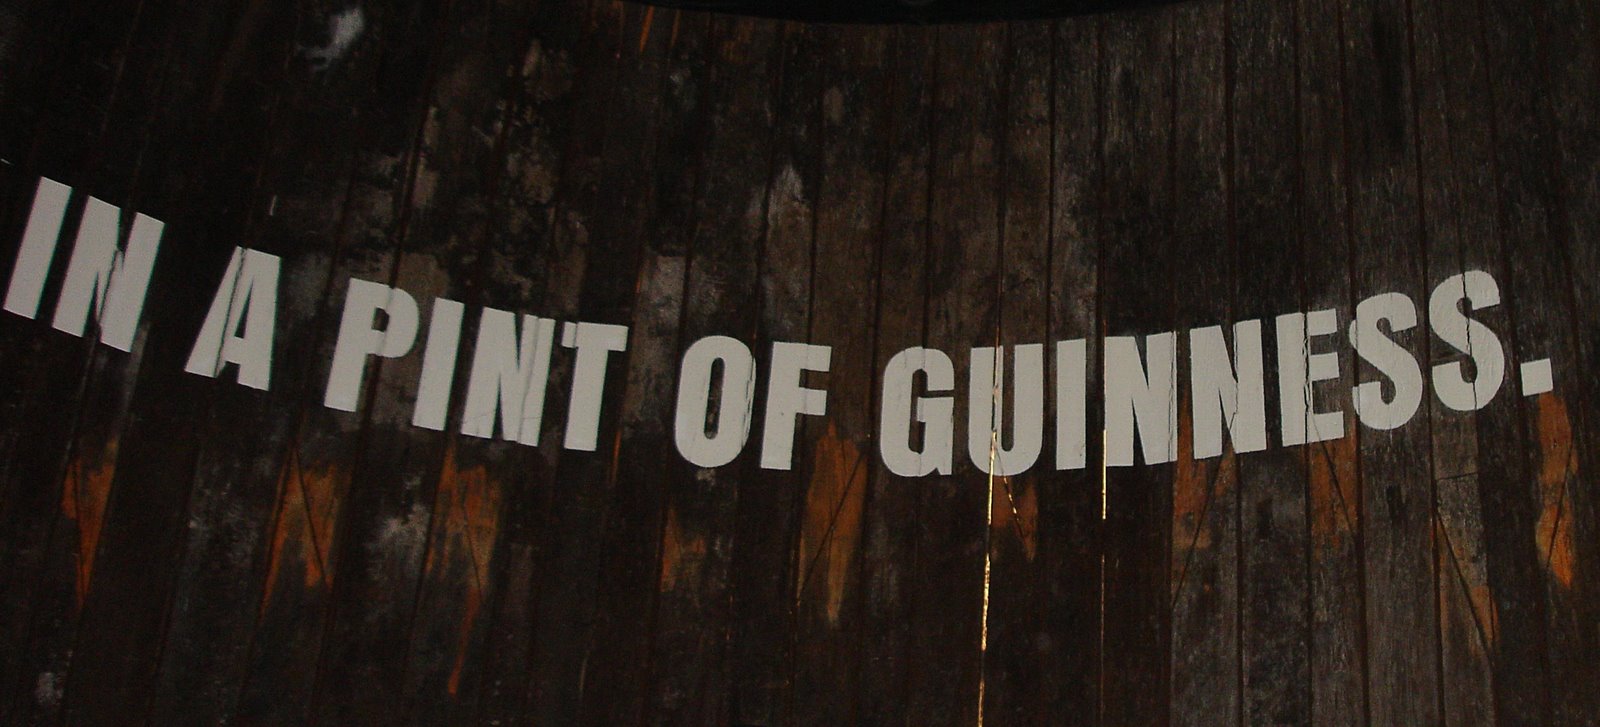 [in+a+pint+of+guiness.jpg]